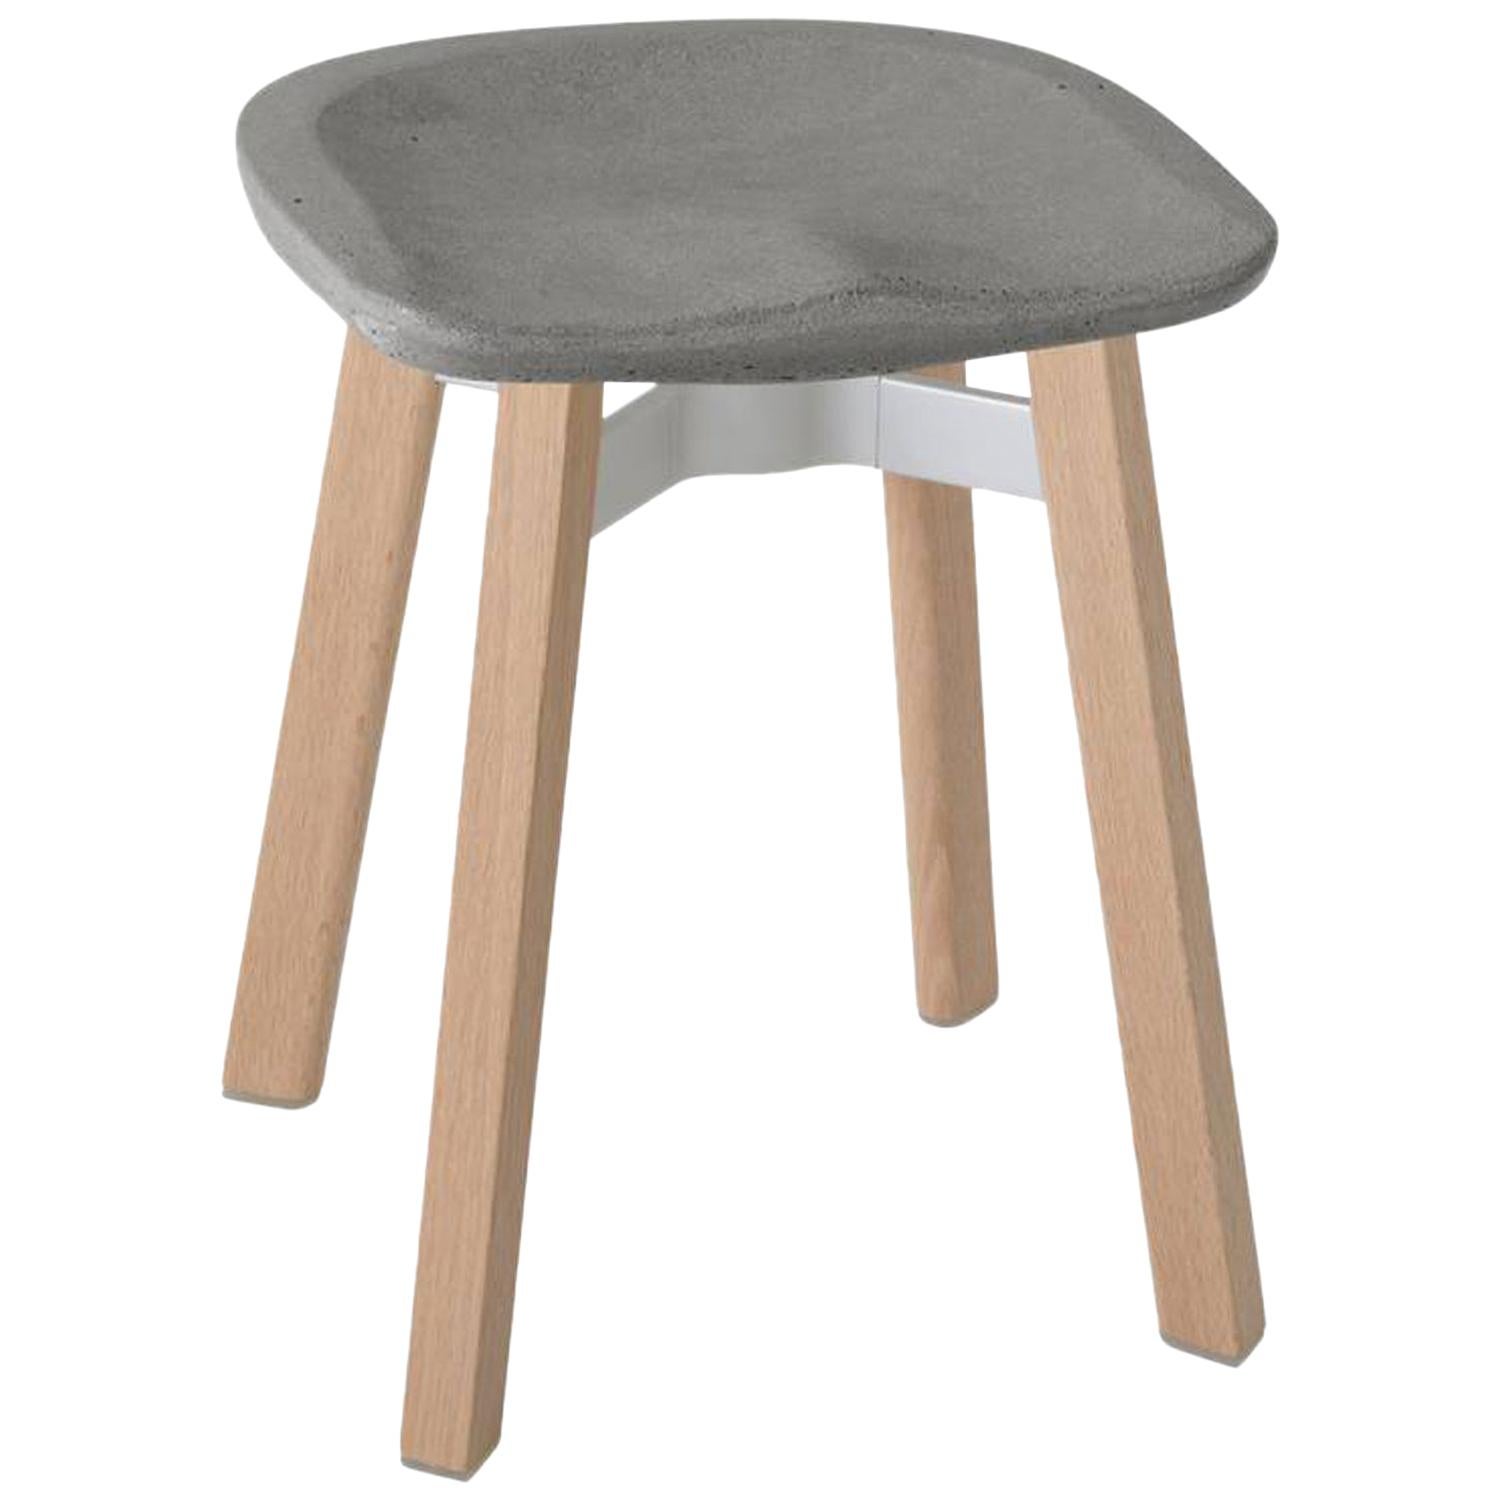 Emeco Su Small Stool in Wood with Eco Concrete Seat by Nendo